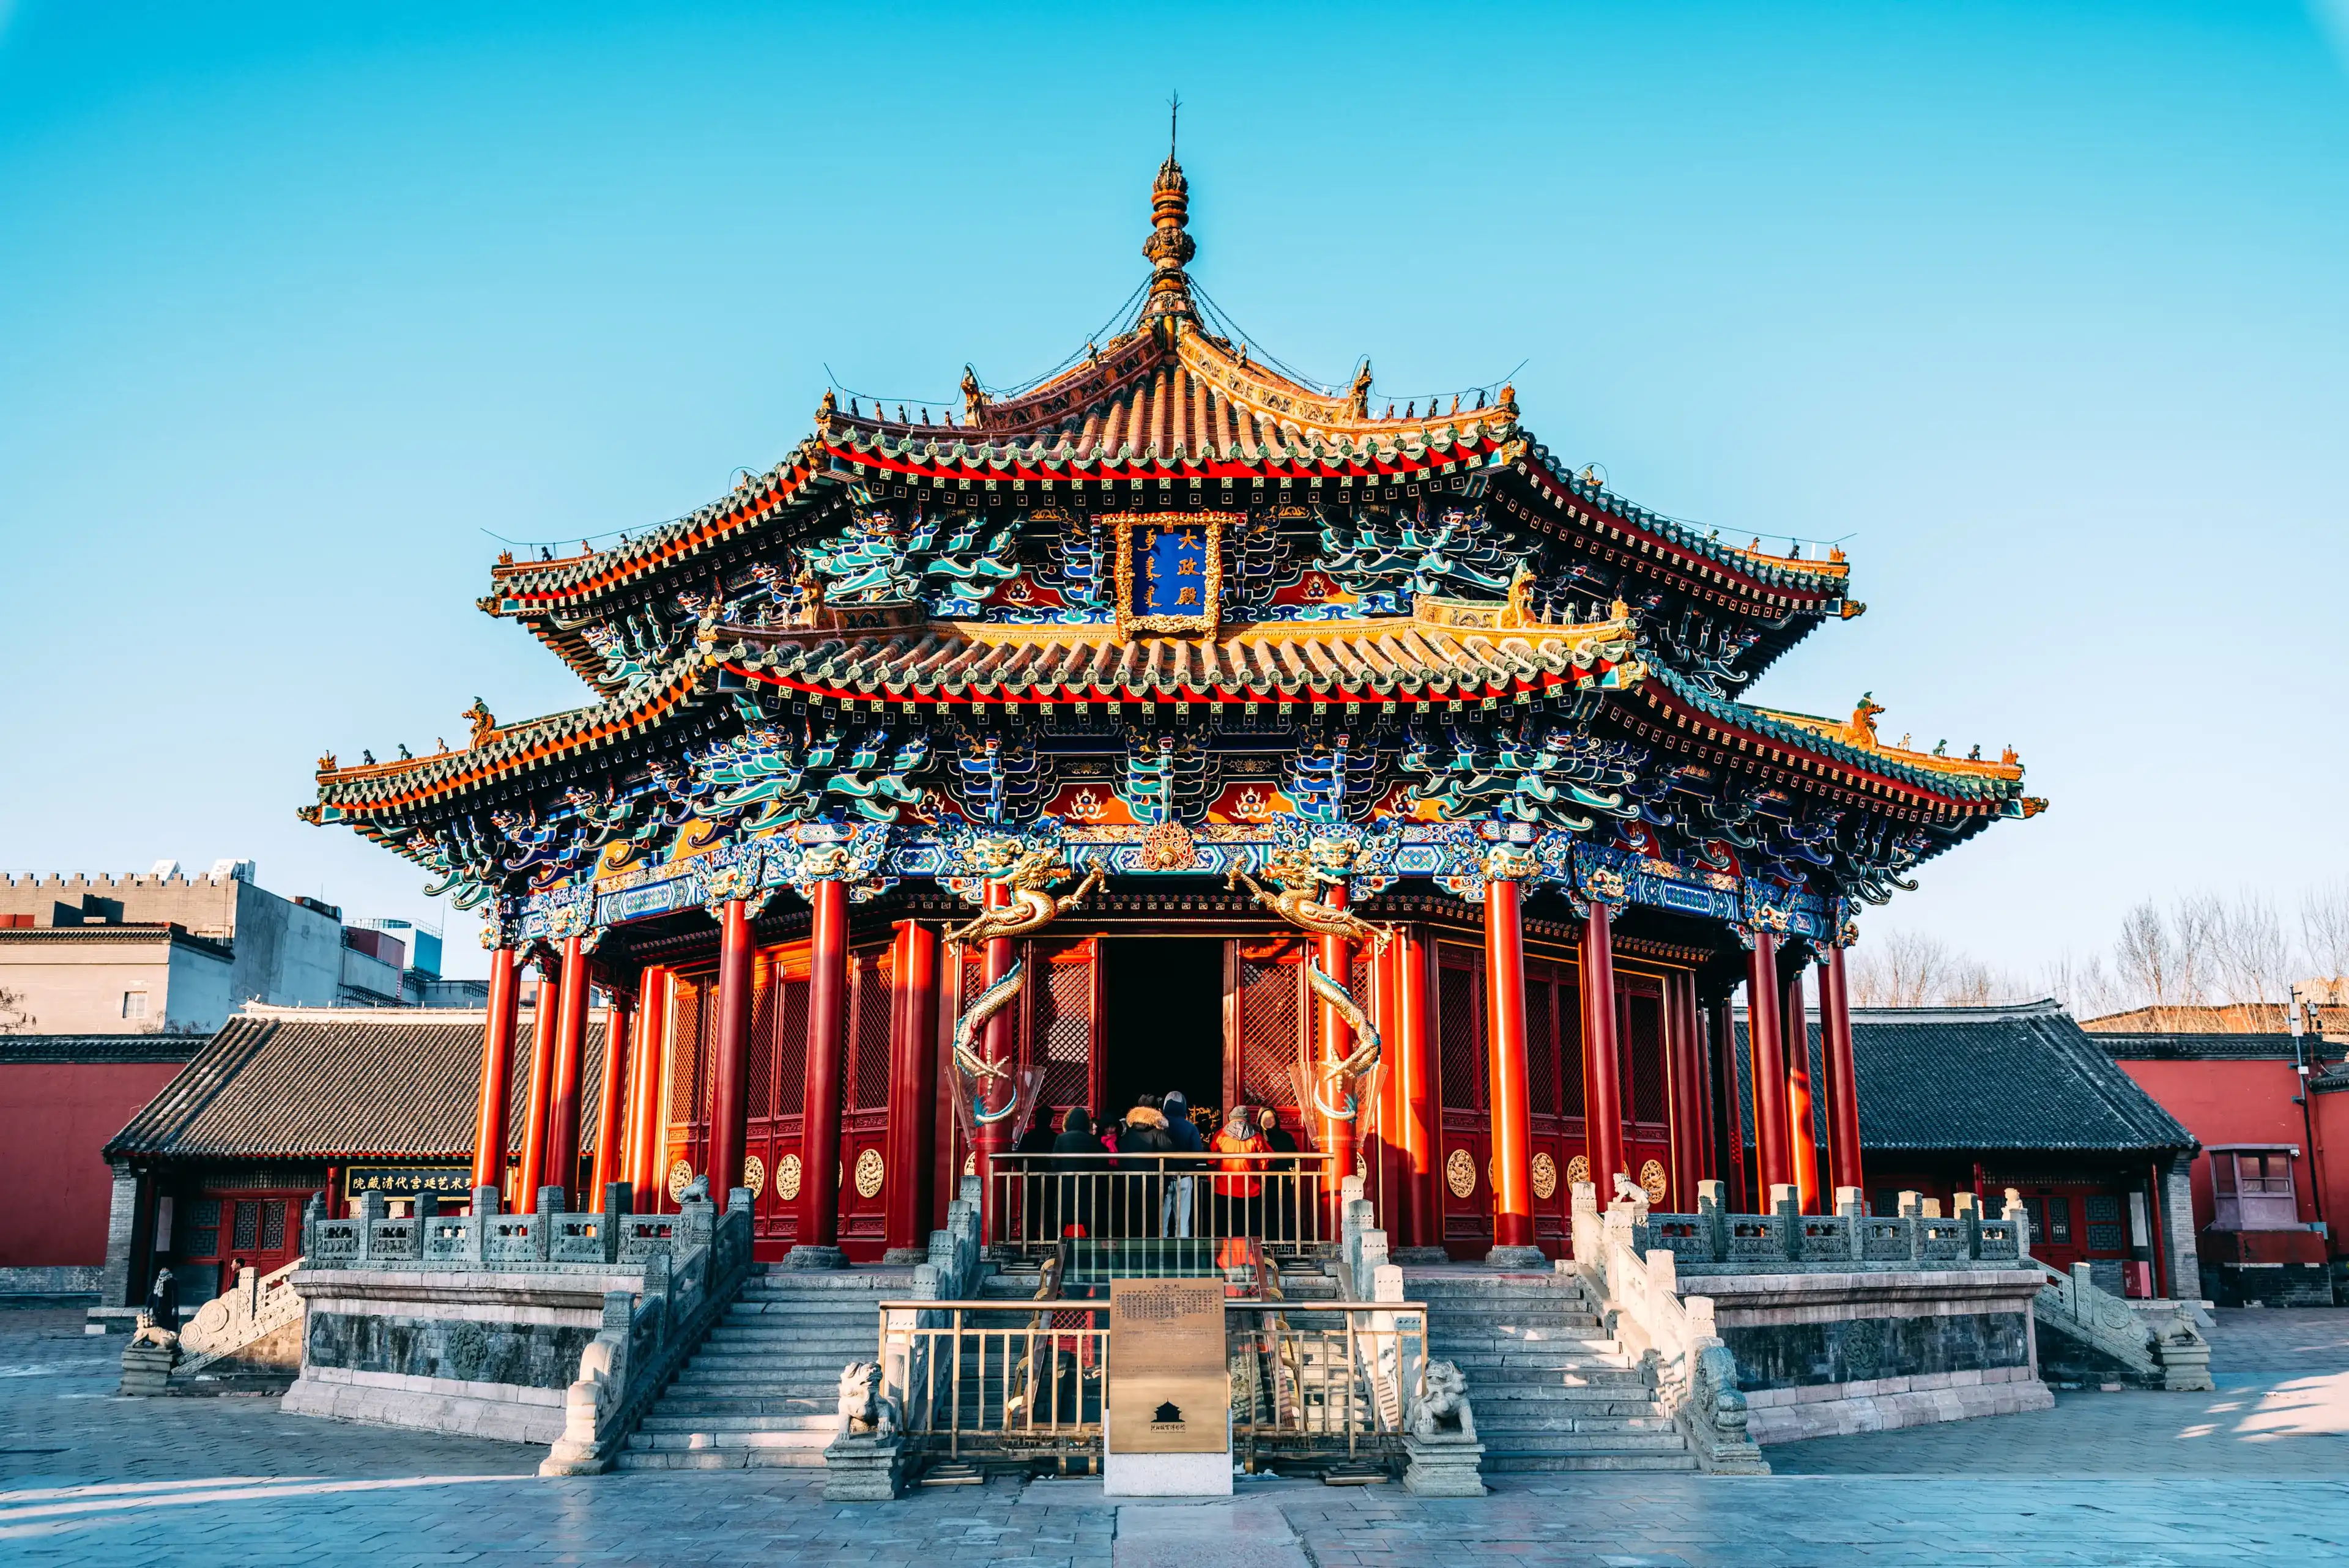 SHENYANG, CHINA JANUARY 1 2019 : Shenyang Imperial Palace (Mukden Palace) was the former imperial palace of the early Manchu-led Qing dynasty and UNESCO world heritage site built in 400 years 